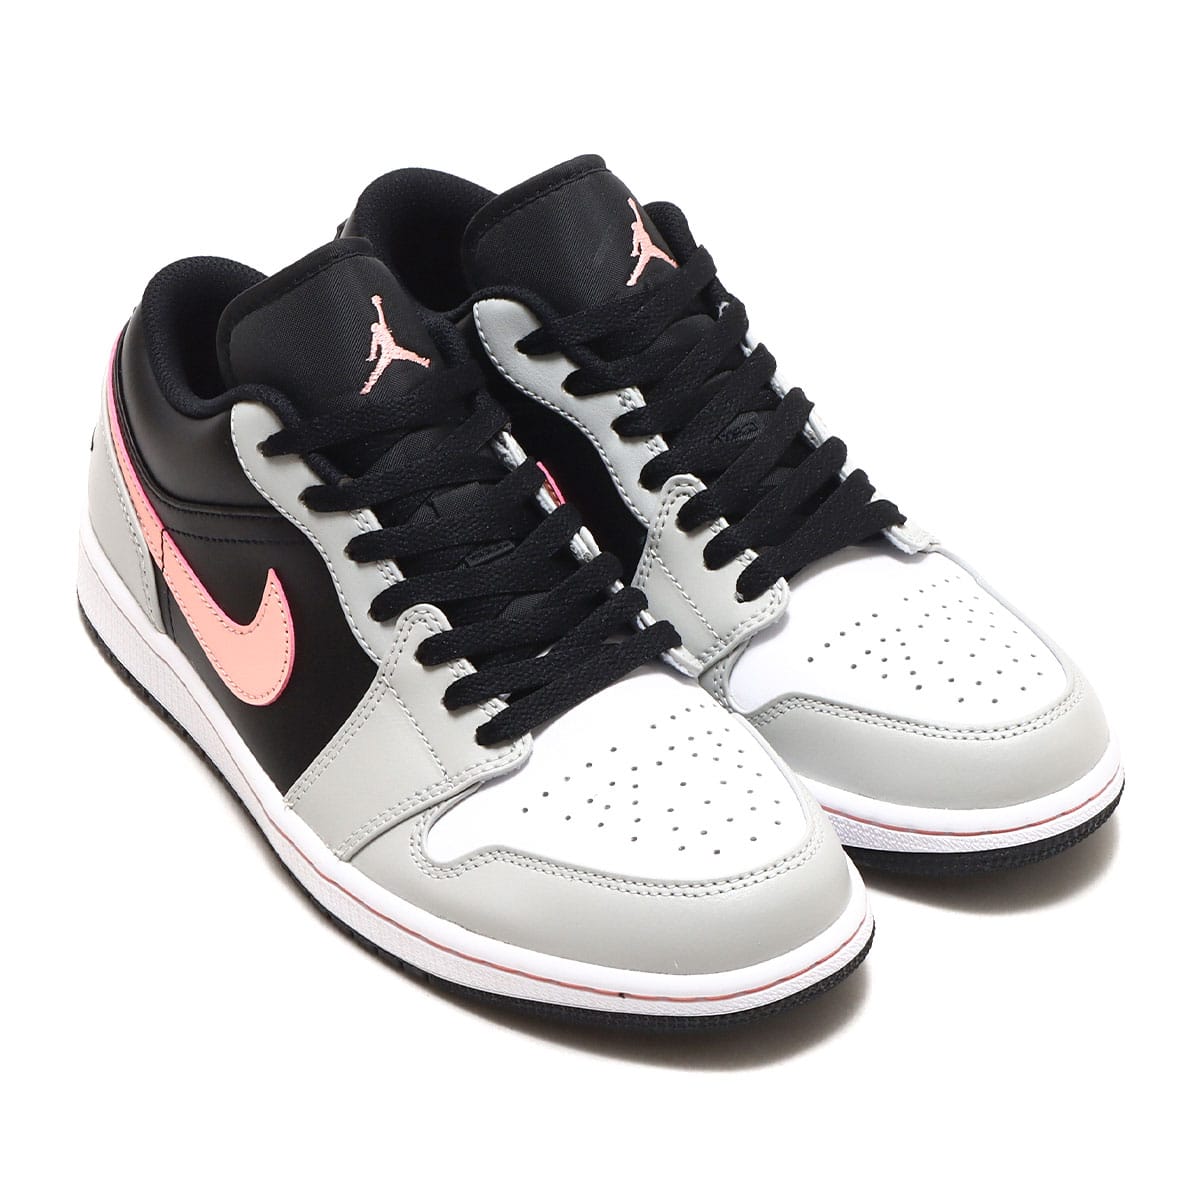 NIKE  エアジョーダン1 LOW  Bleached Coral